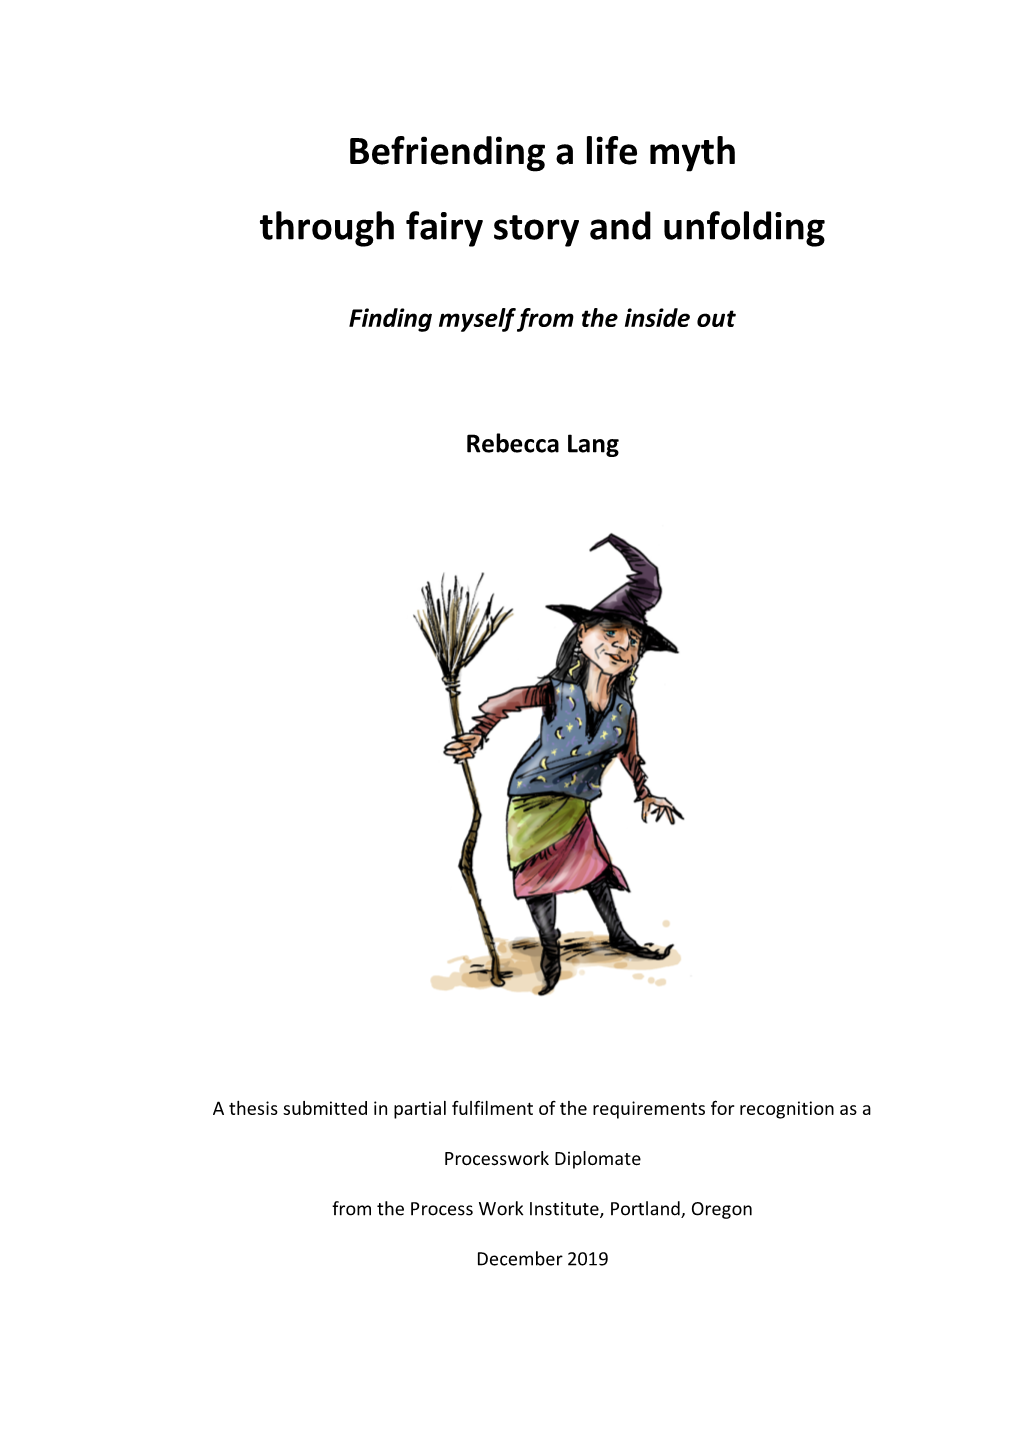 Befriending a Life Myth Through Fairy Story and Unfolding